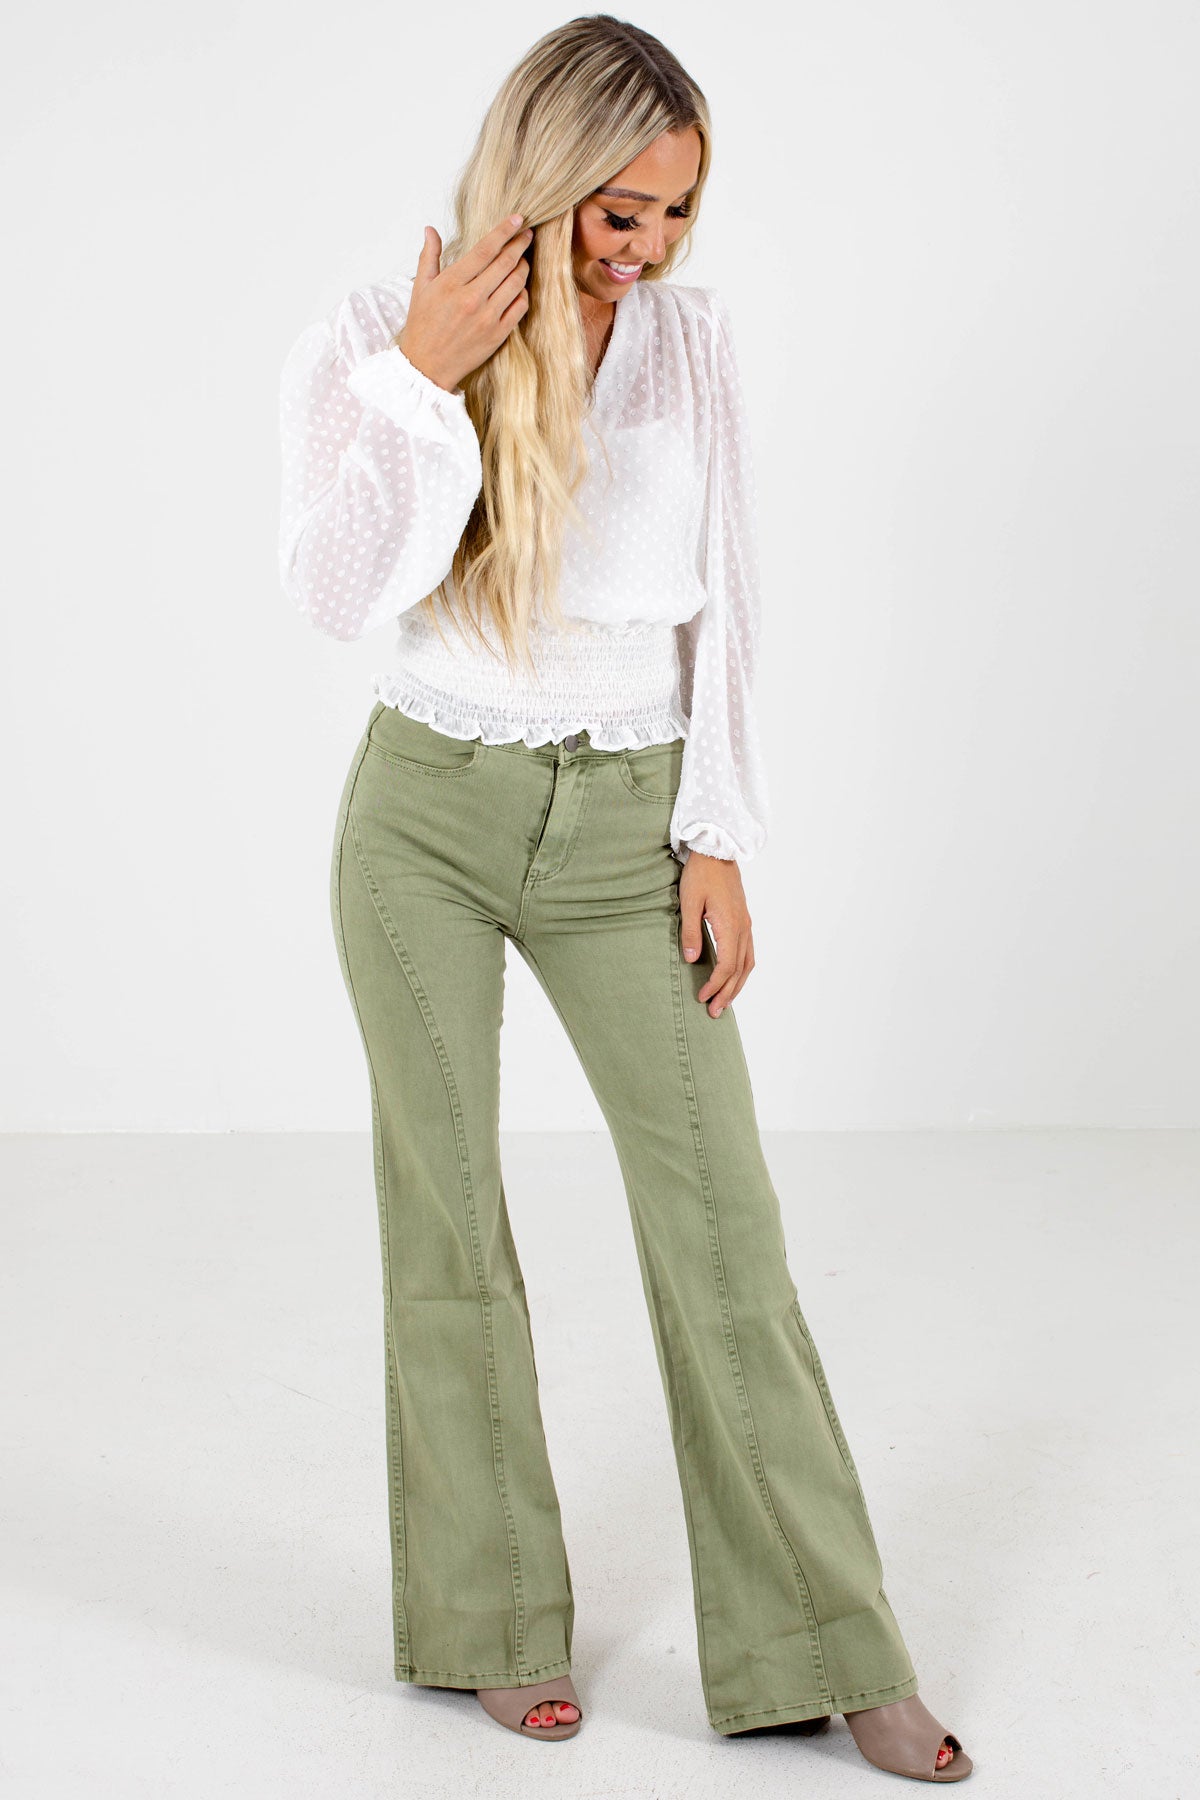 Sage Green Cute and Comfortable Boutique Flare Jeans for Women